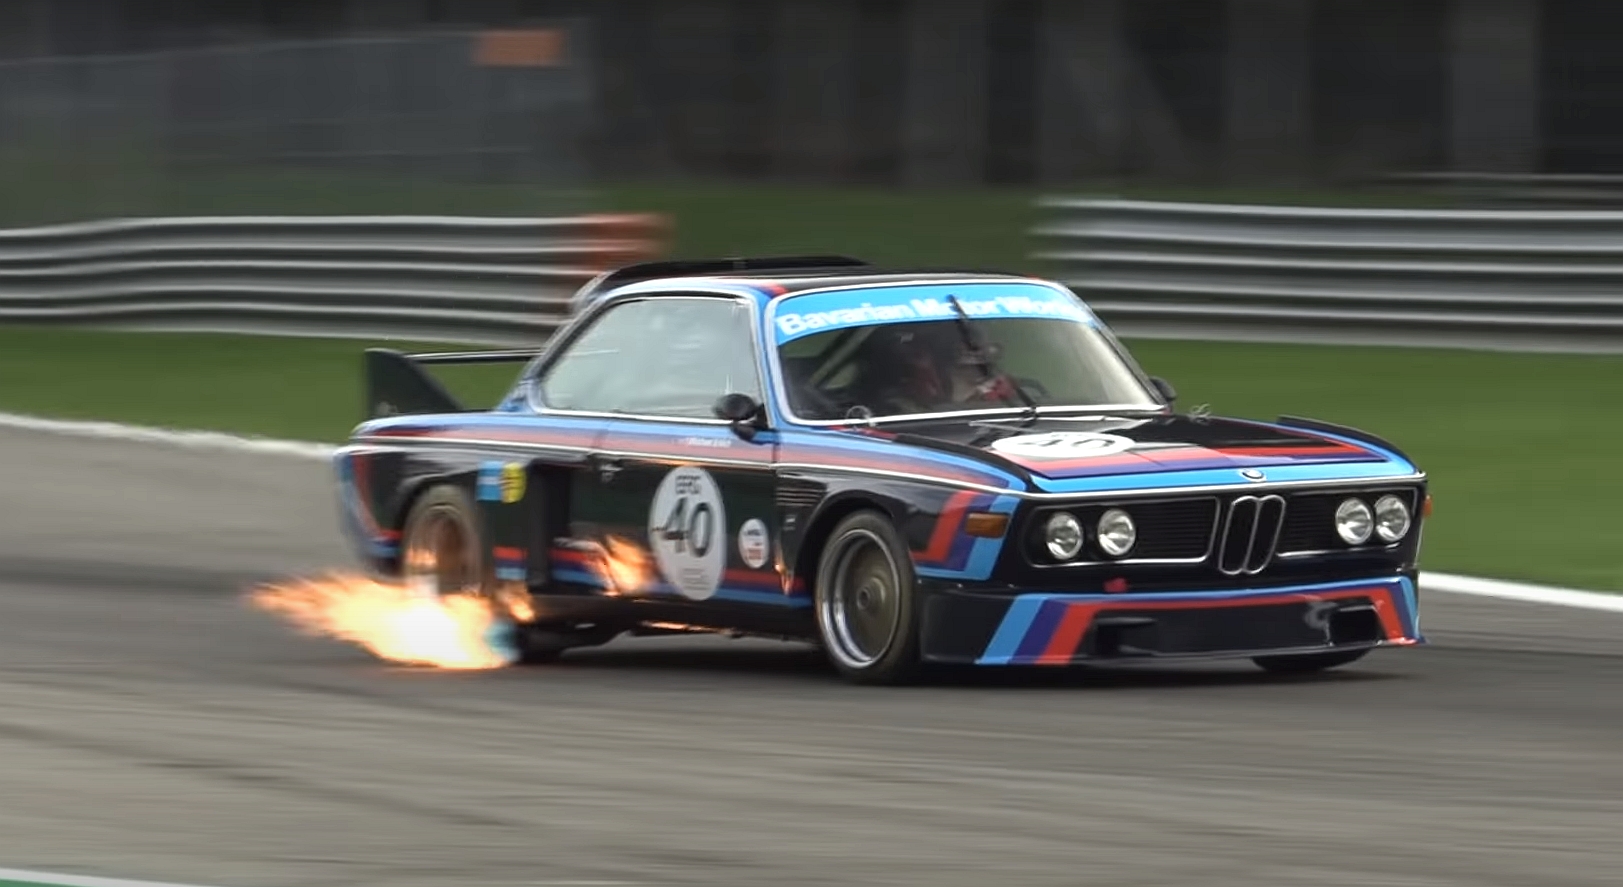 BMW 3.0 CSL Batmobile Spitting Flames at Monza Is Vintage Racing at Its Finest